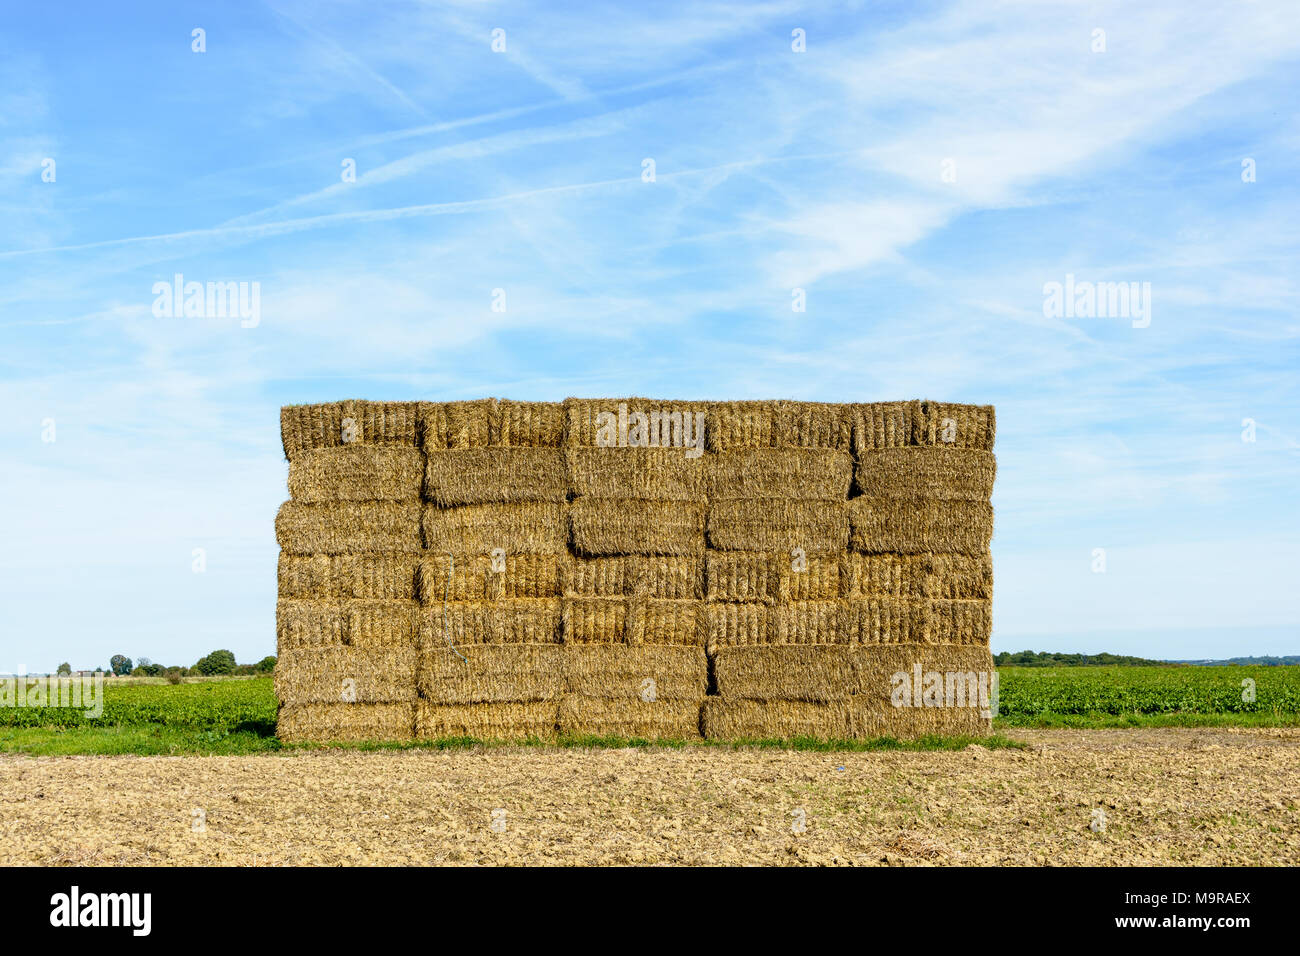 A wall of rectangular bales of straw stacked in a field before being transported to shelter. Stock Photo